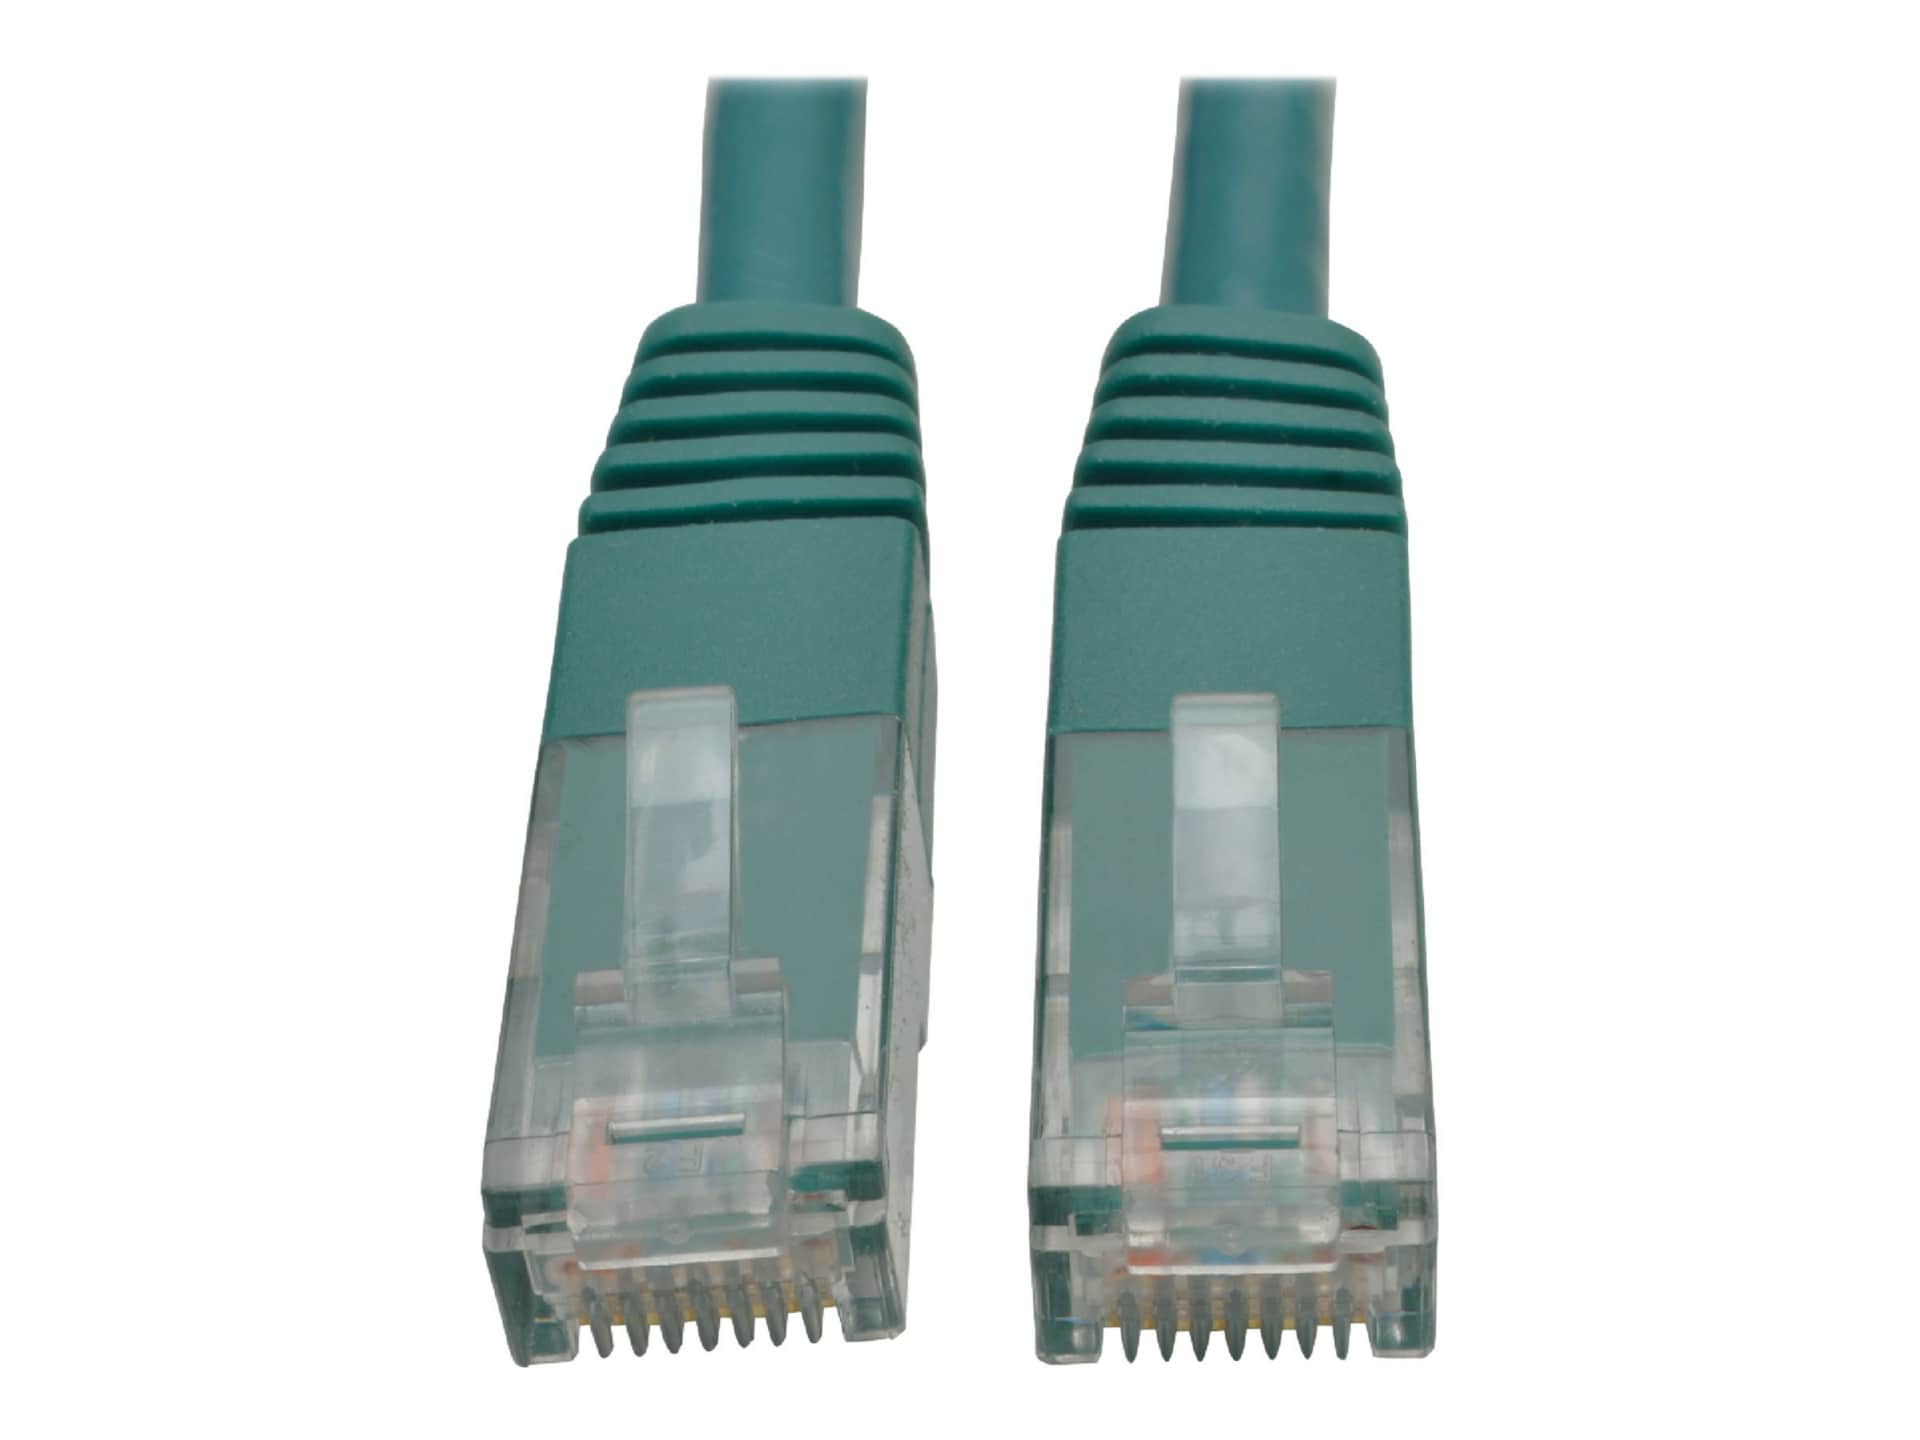 Tripp Lite 3ft Cat6 Gigabit Molded Patch Cable RJ45 M/M 550MHz 24 AWG Green